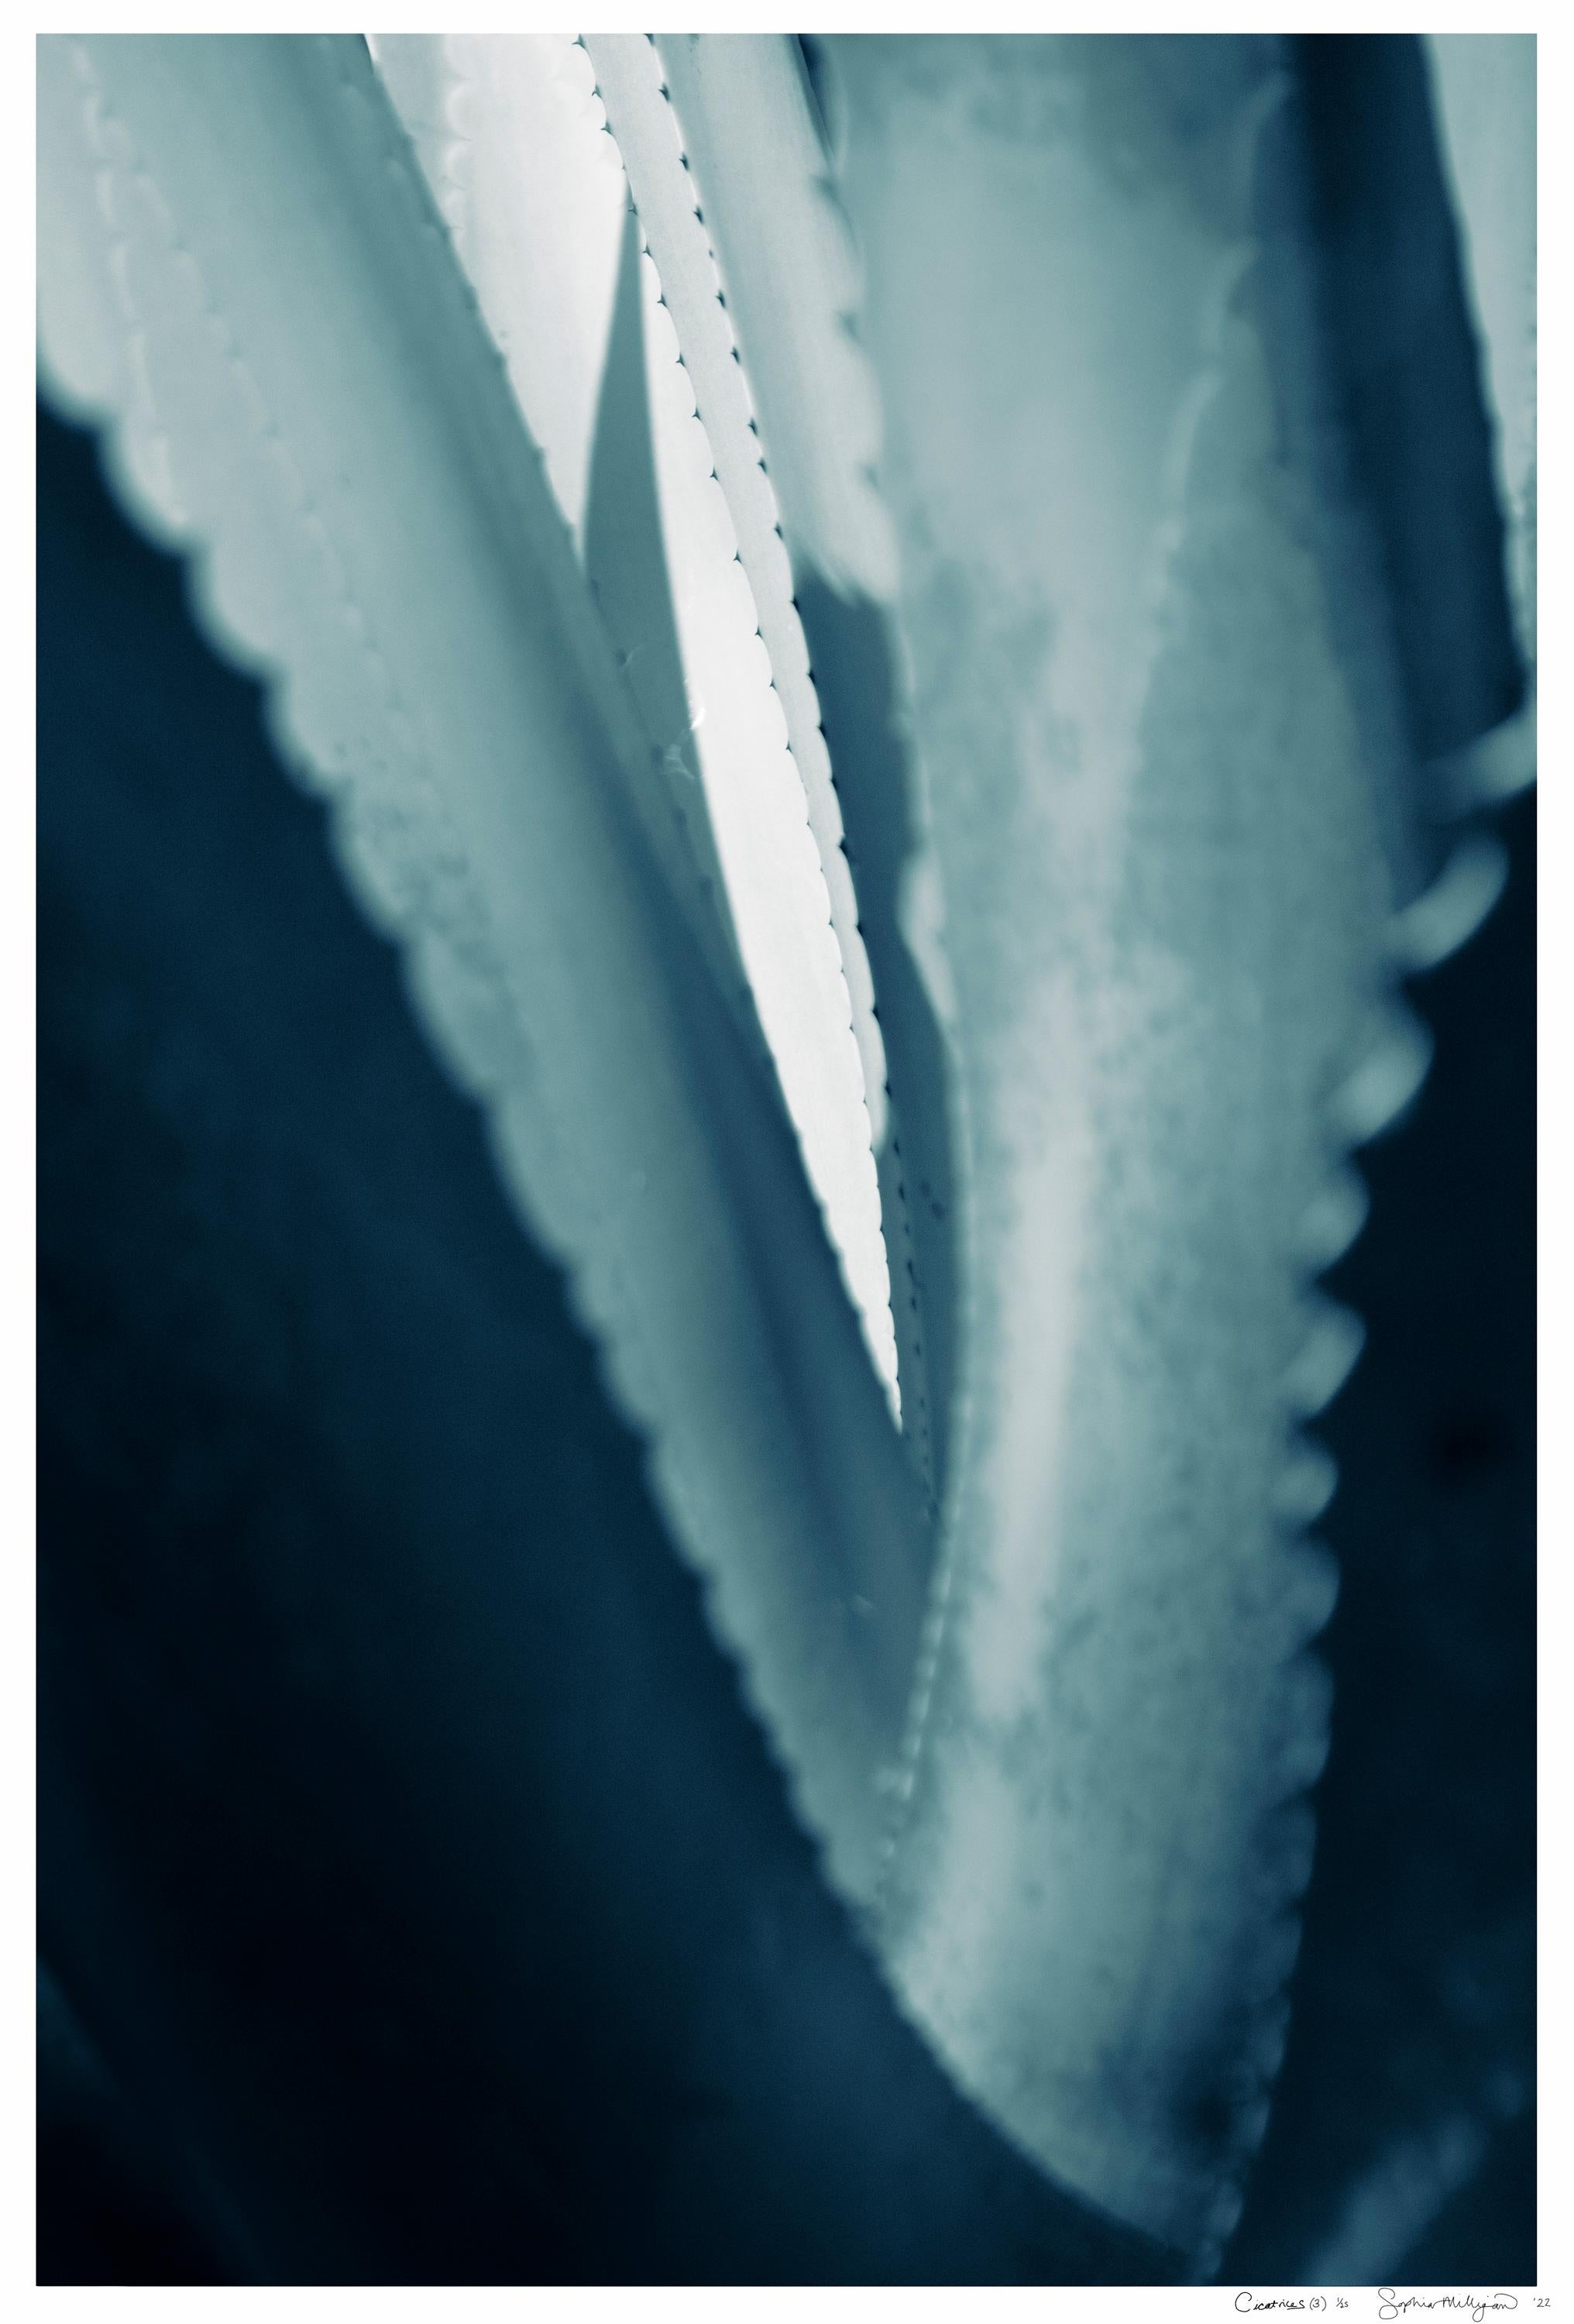 'Cicatrices 3' Large scale photo. Agave leaf, female tropical blue teal green 